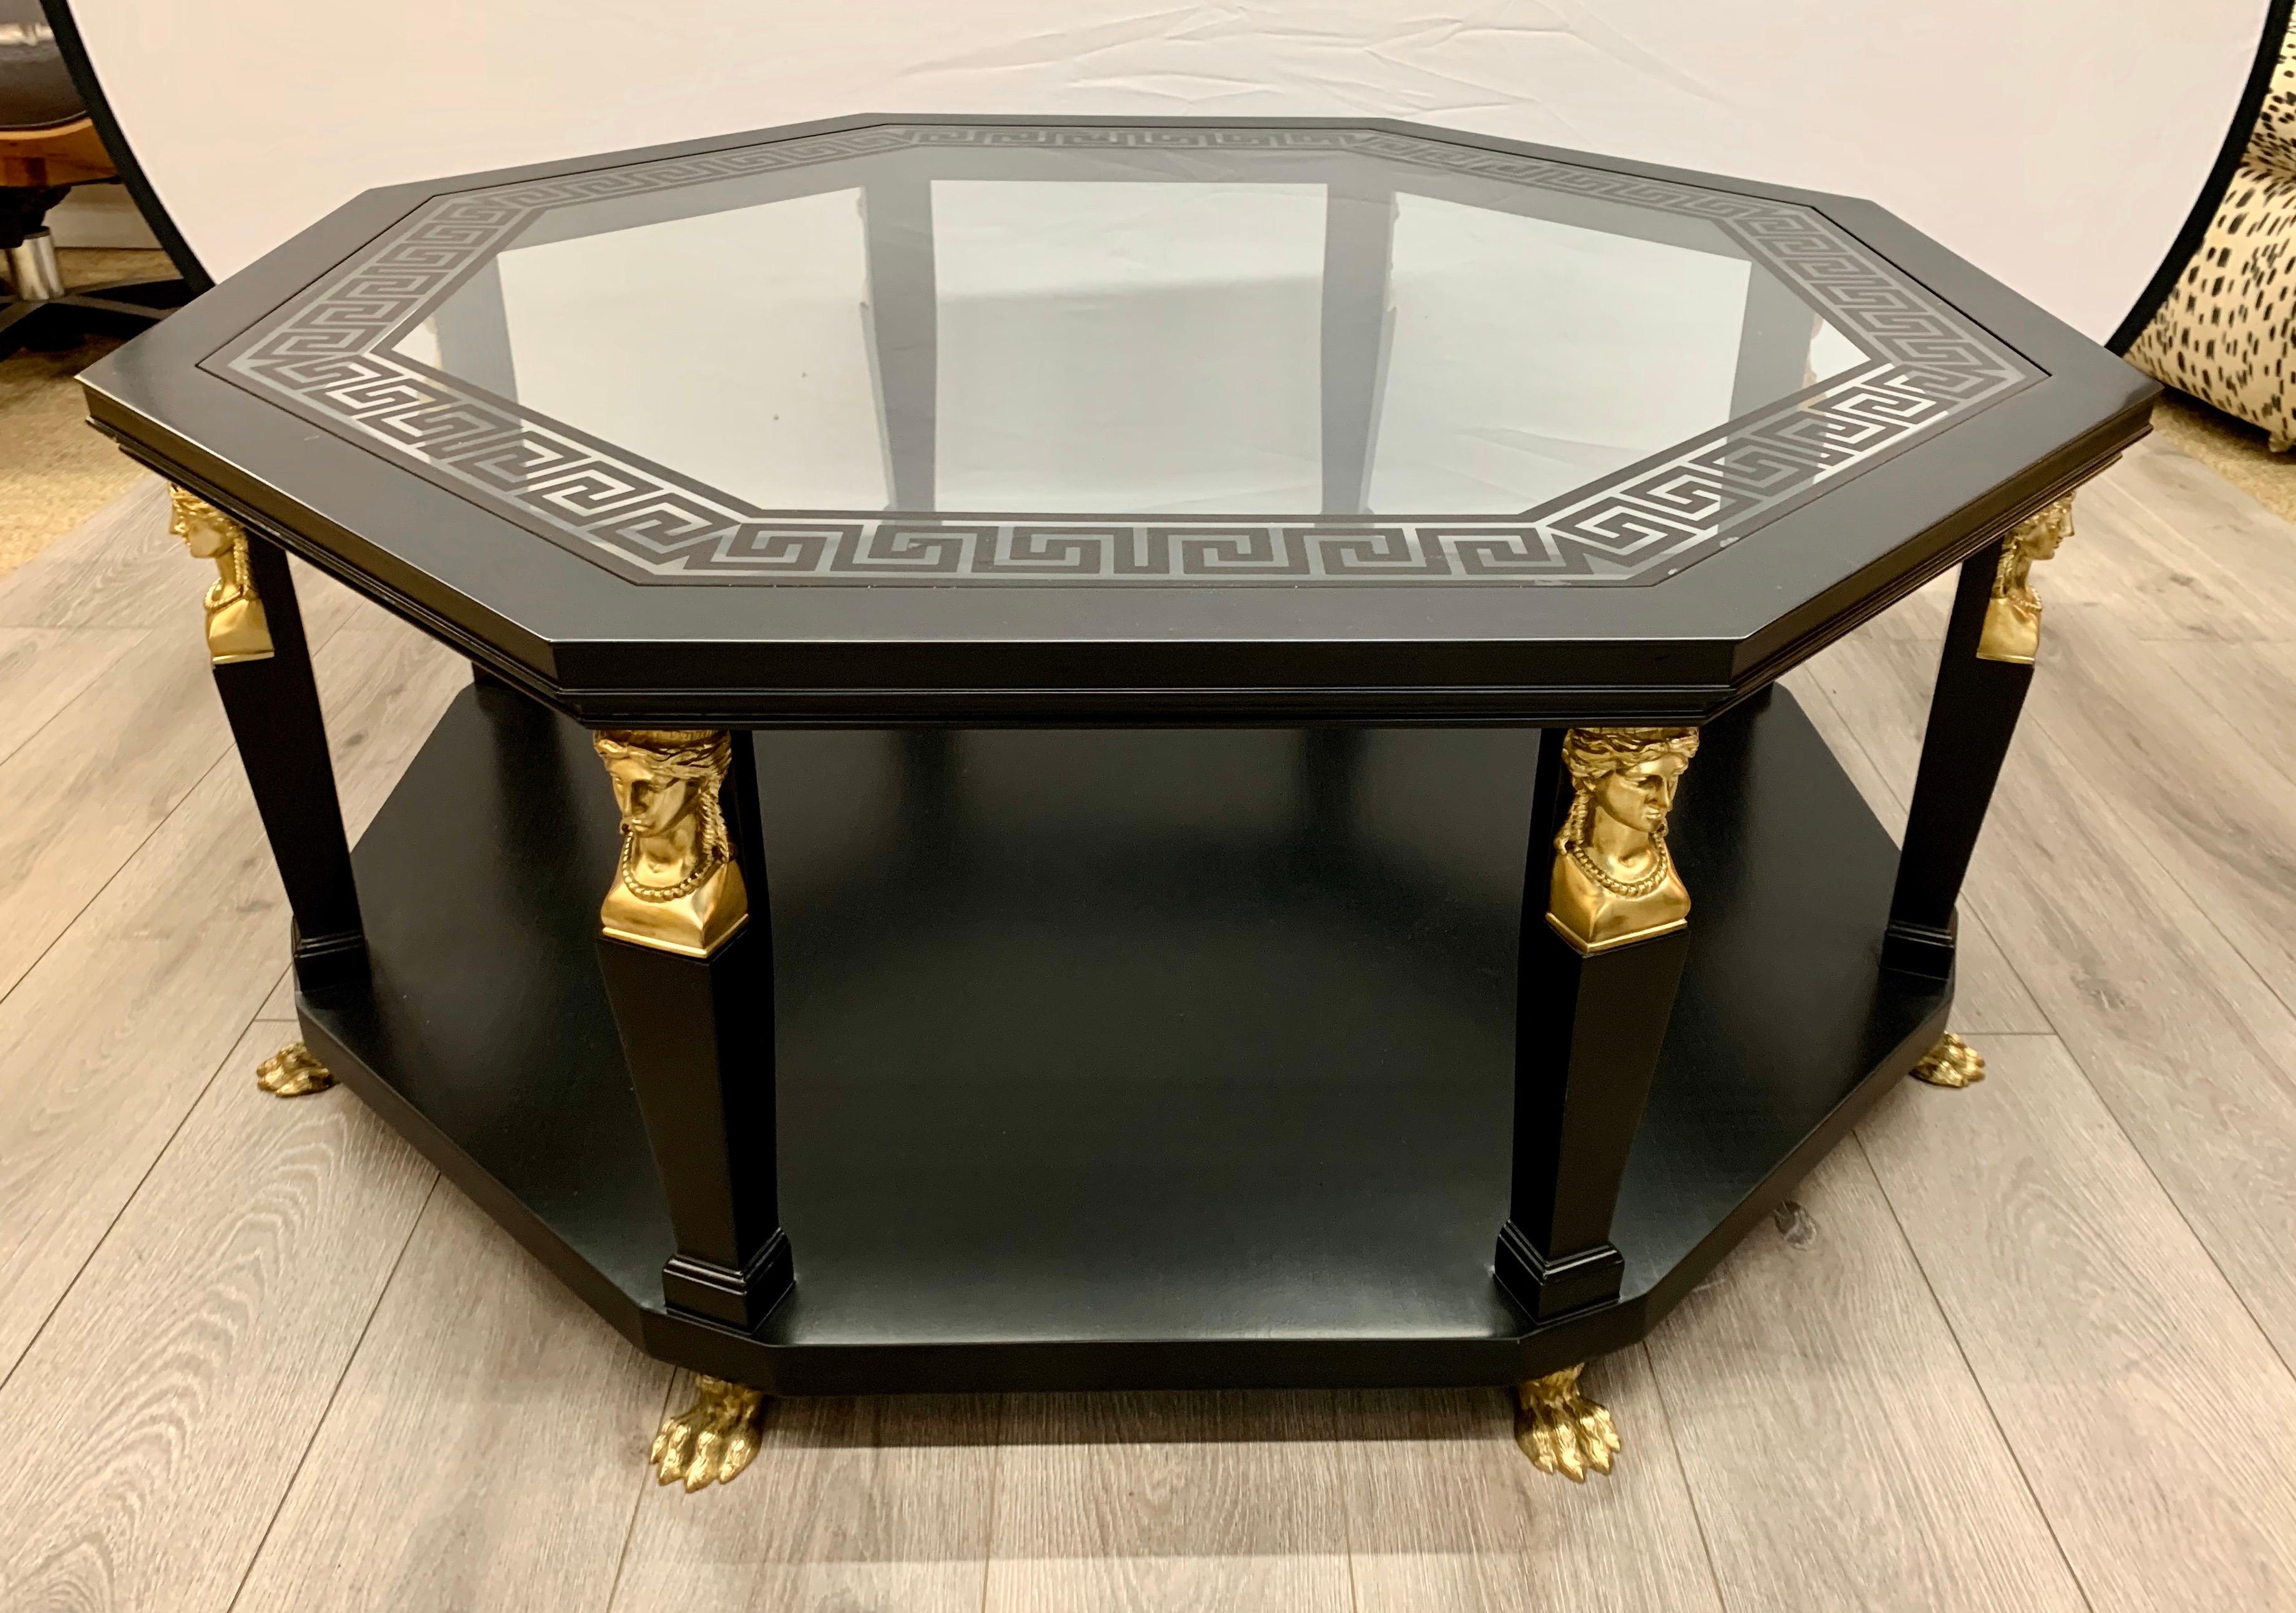 Elegant black and gold Versace-style cocktail table that had luxurious black and gold color as well as etched Greek key design on glass top. Features all brass feet and appliques.